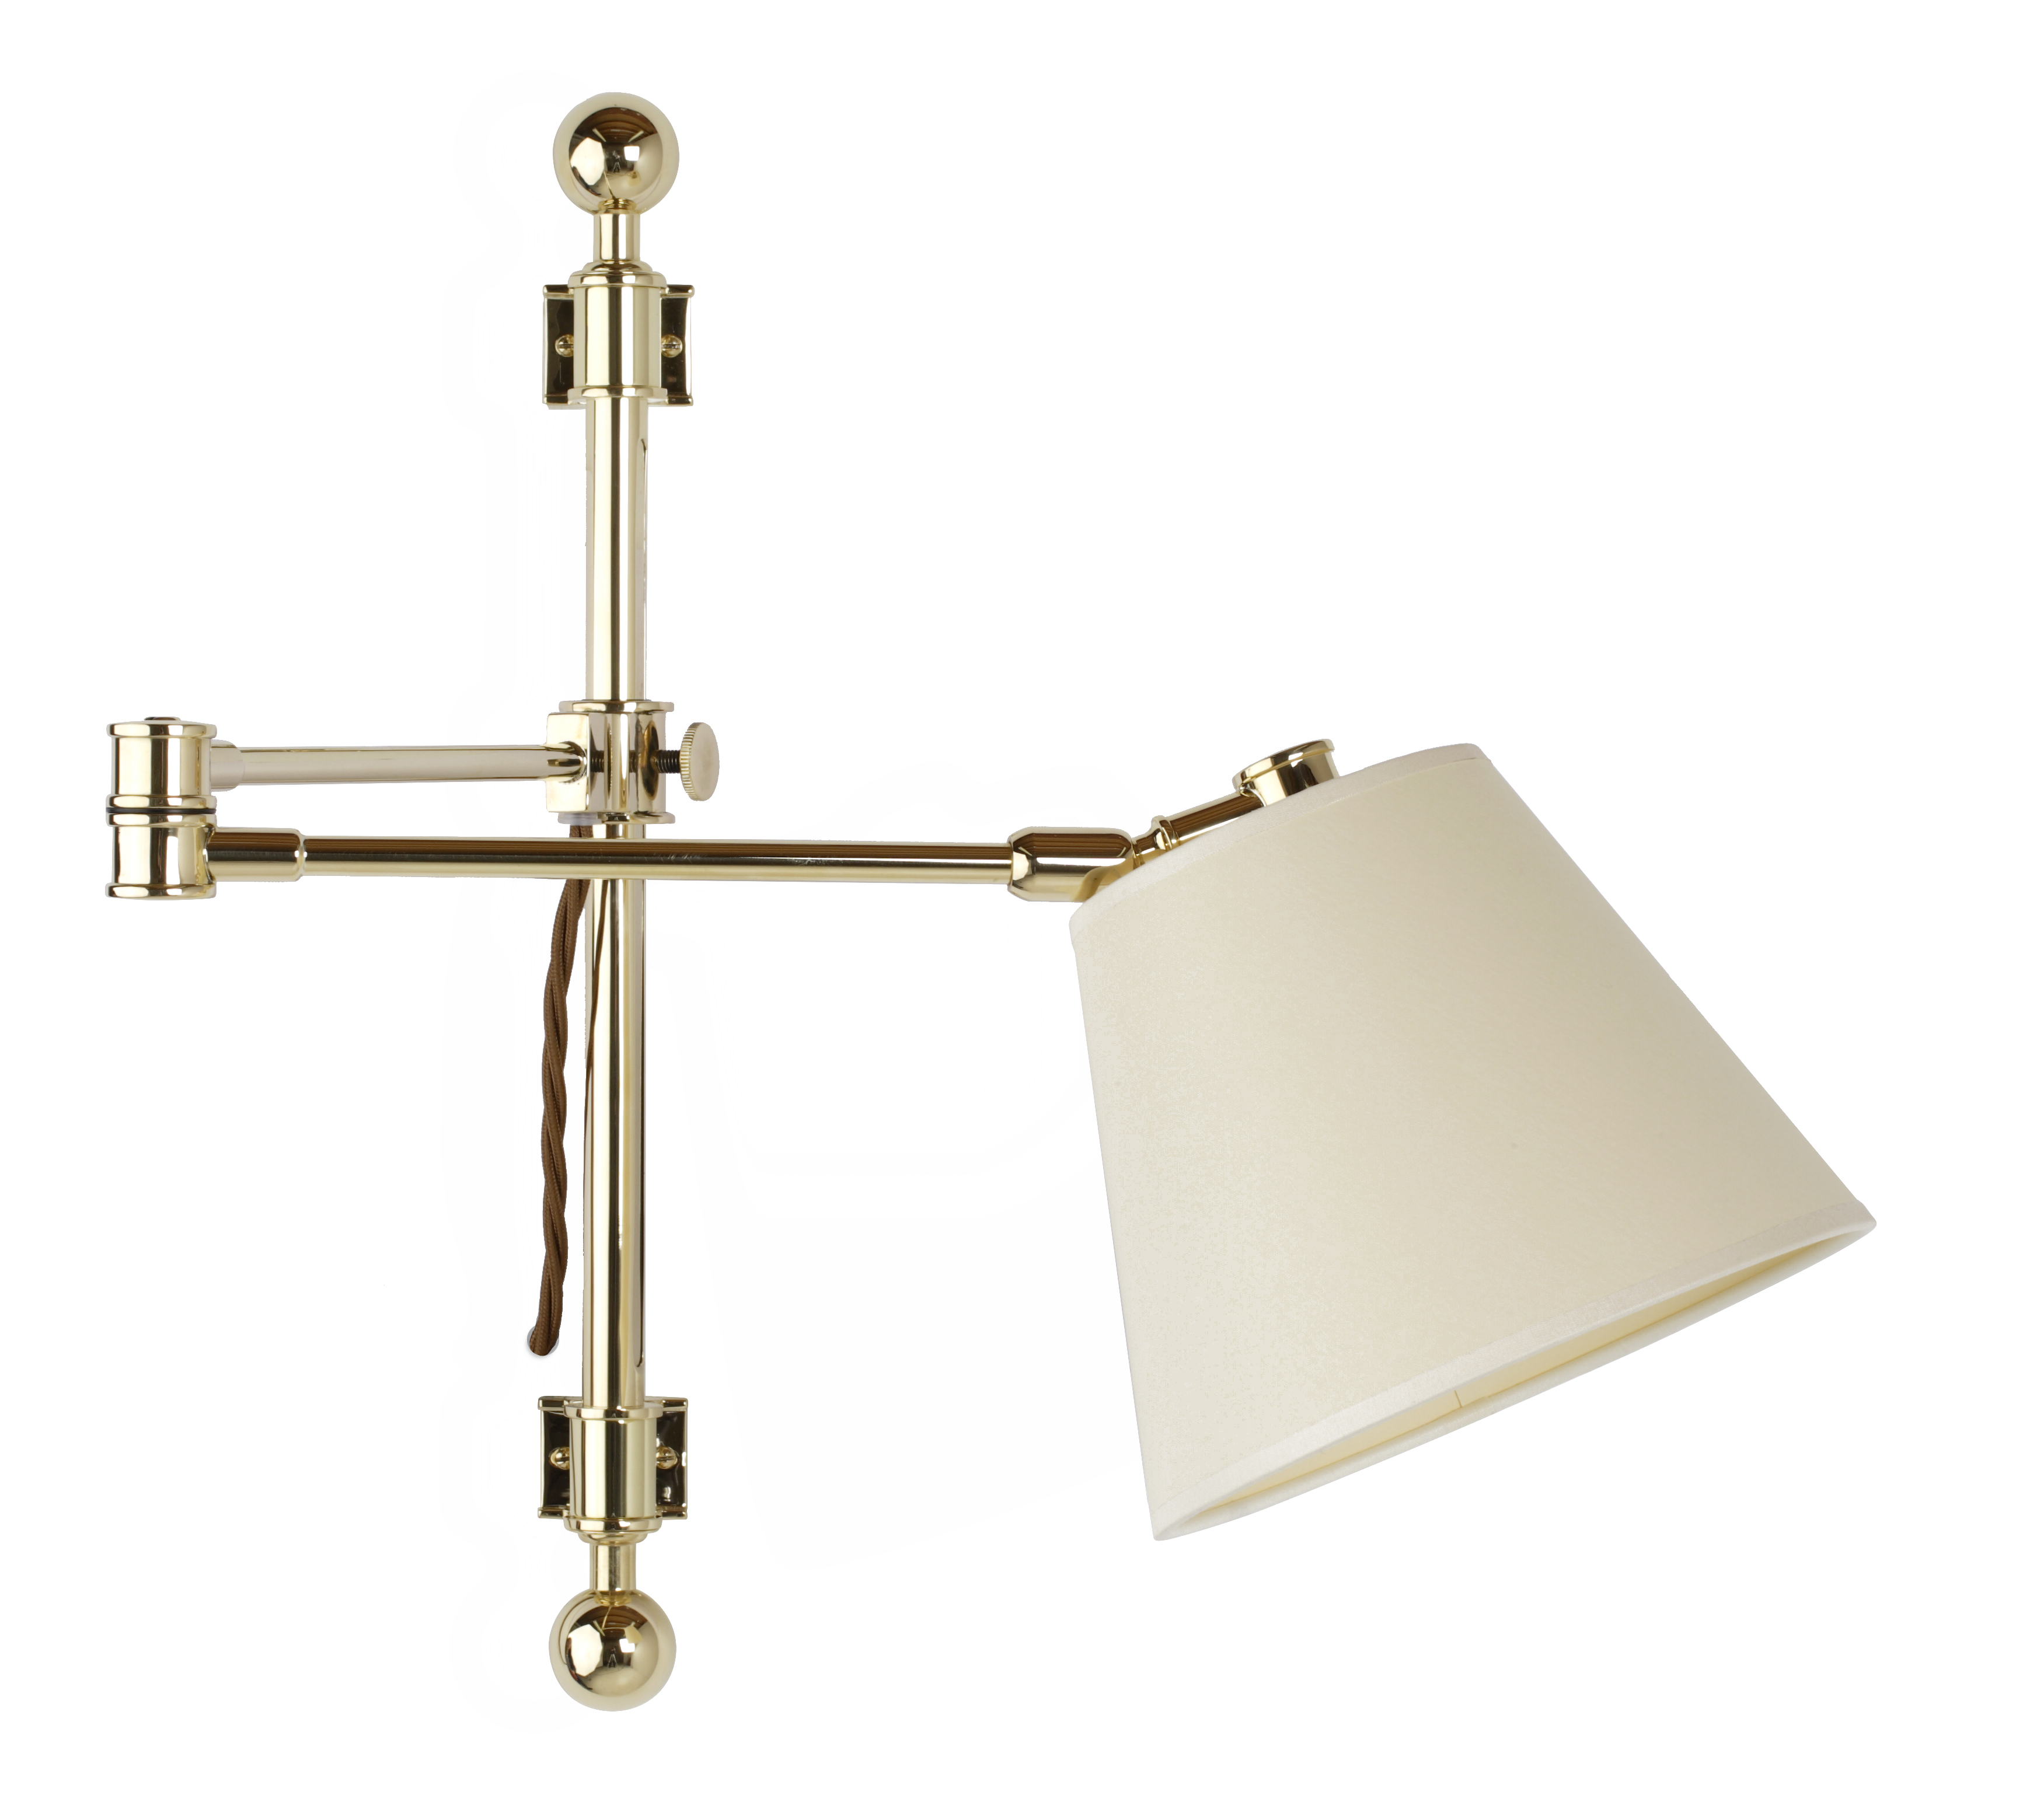 The Reading Wall Light - With Swivel